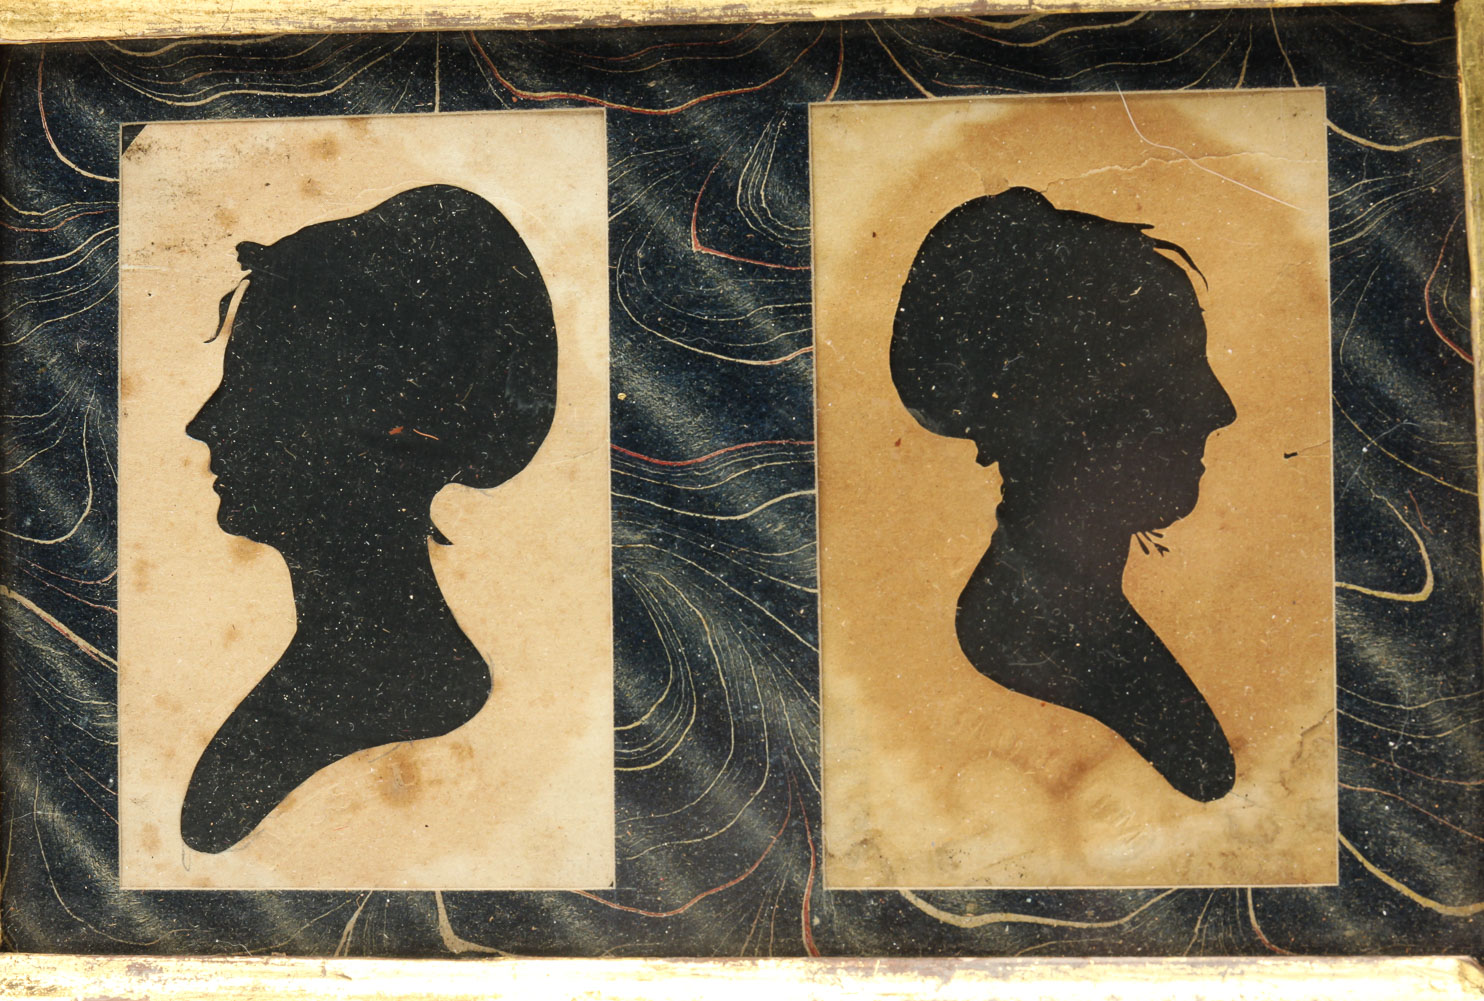 TWO PORTRAITS AND PEALE SILHOUETTES.